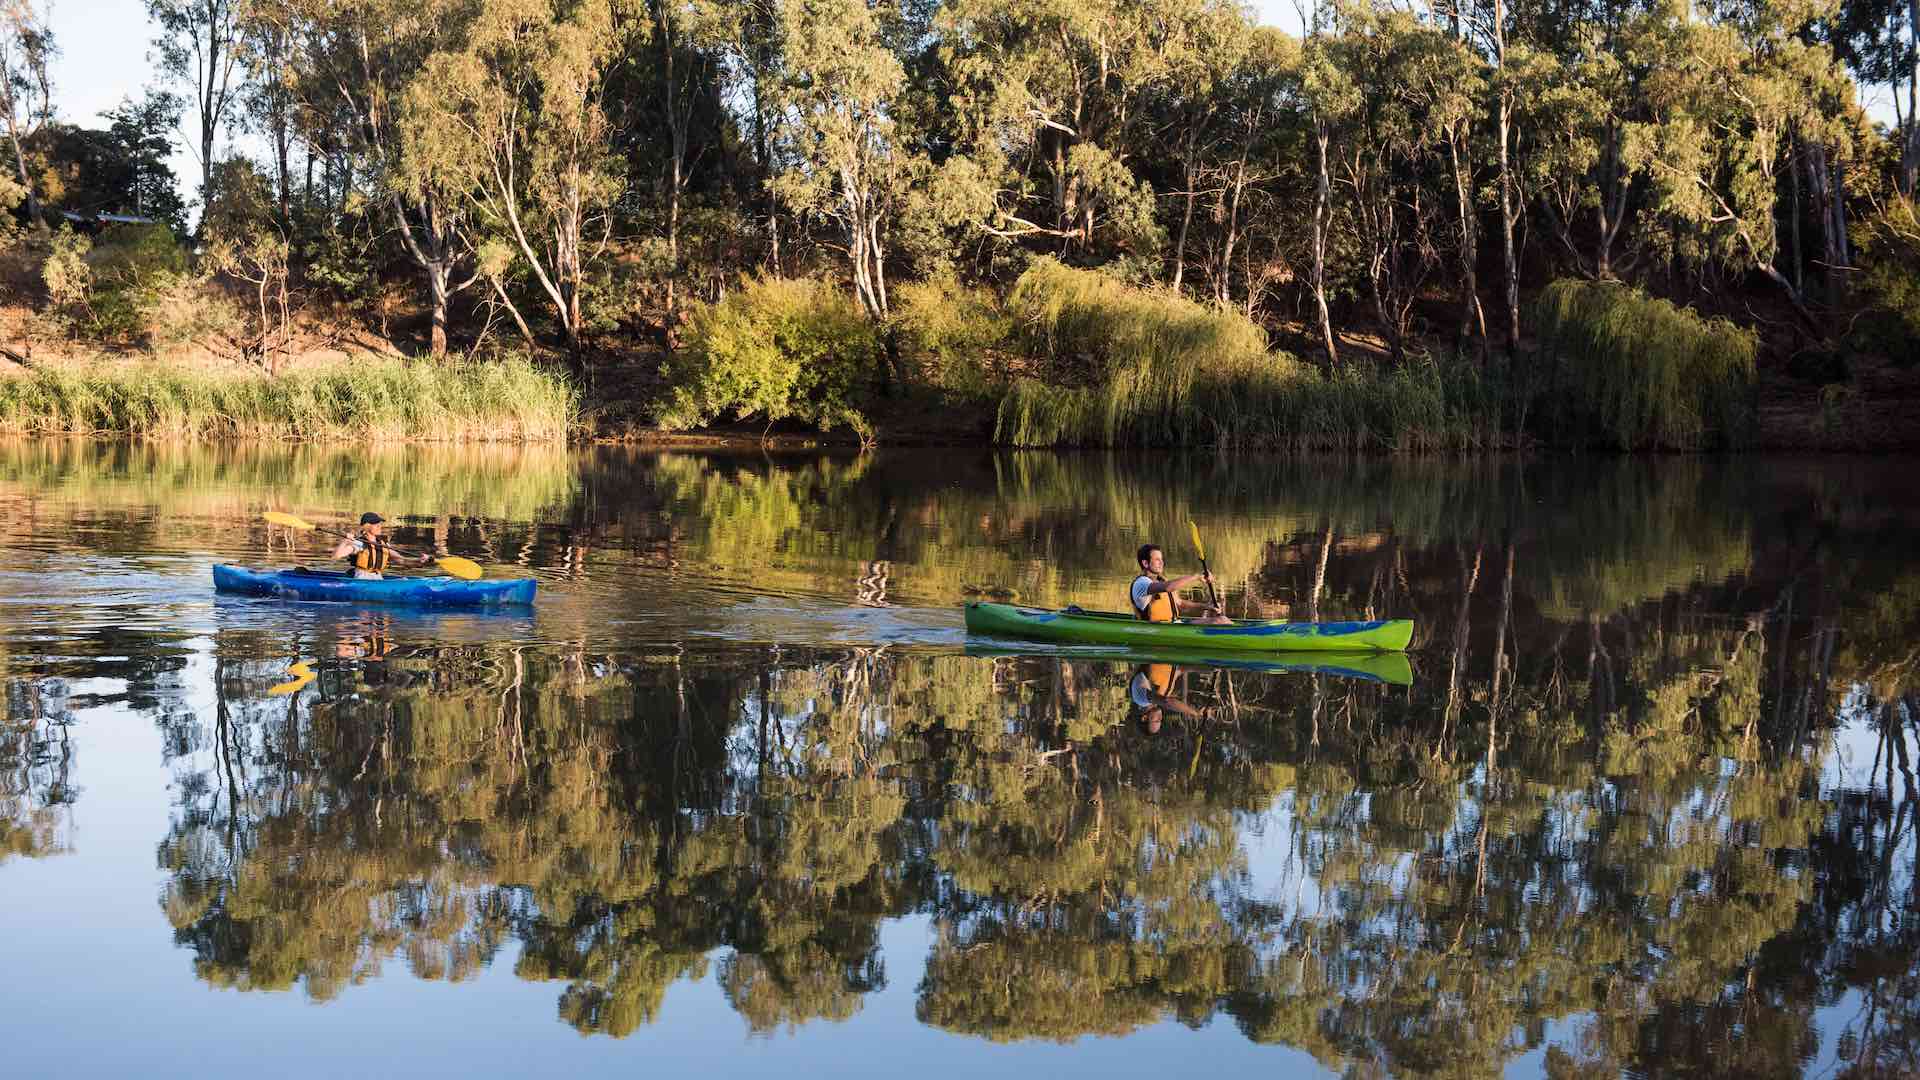 Kayaking on the Murray River at Wills Bend near Echuca